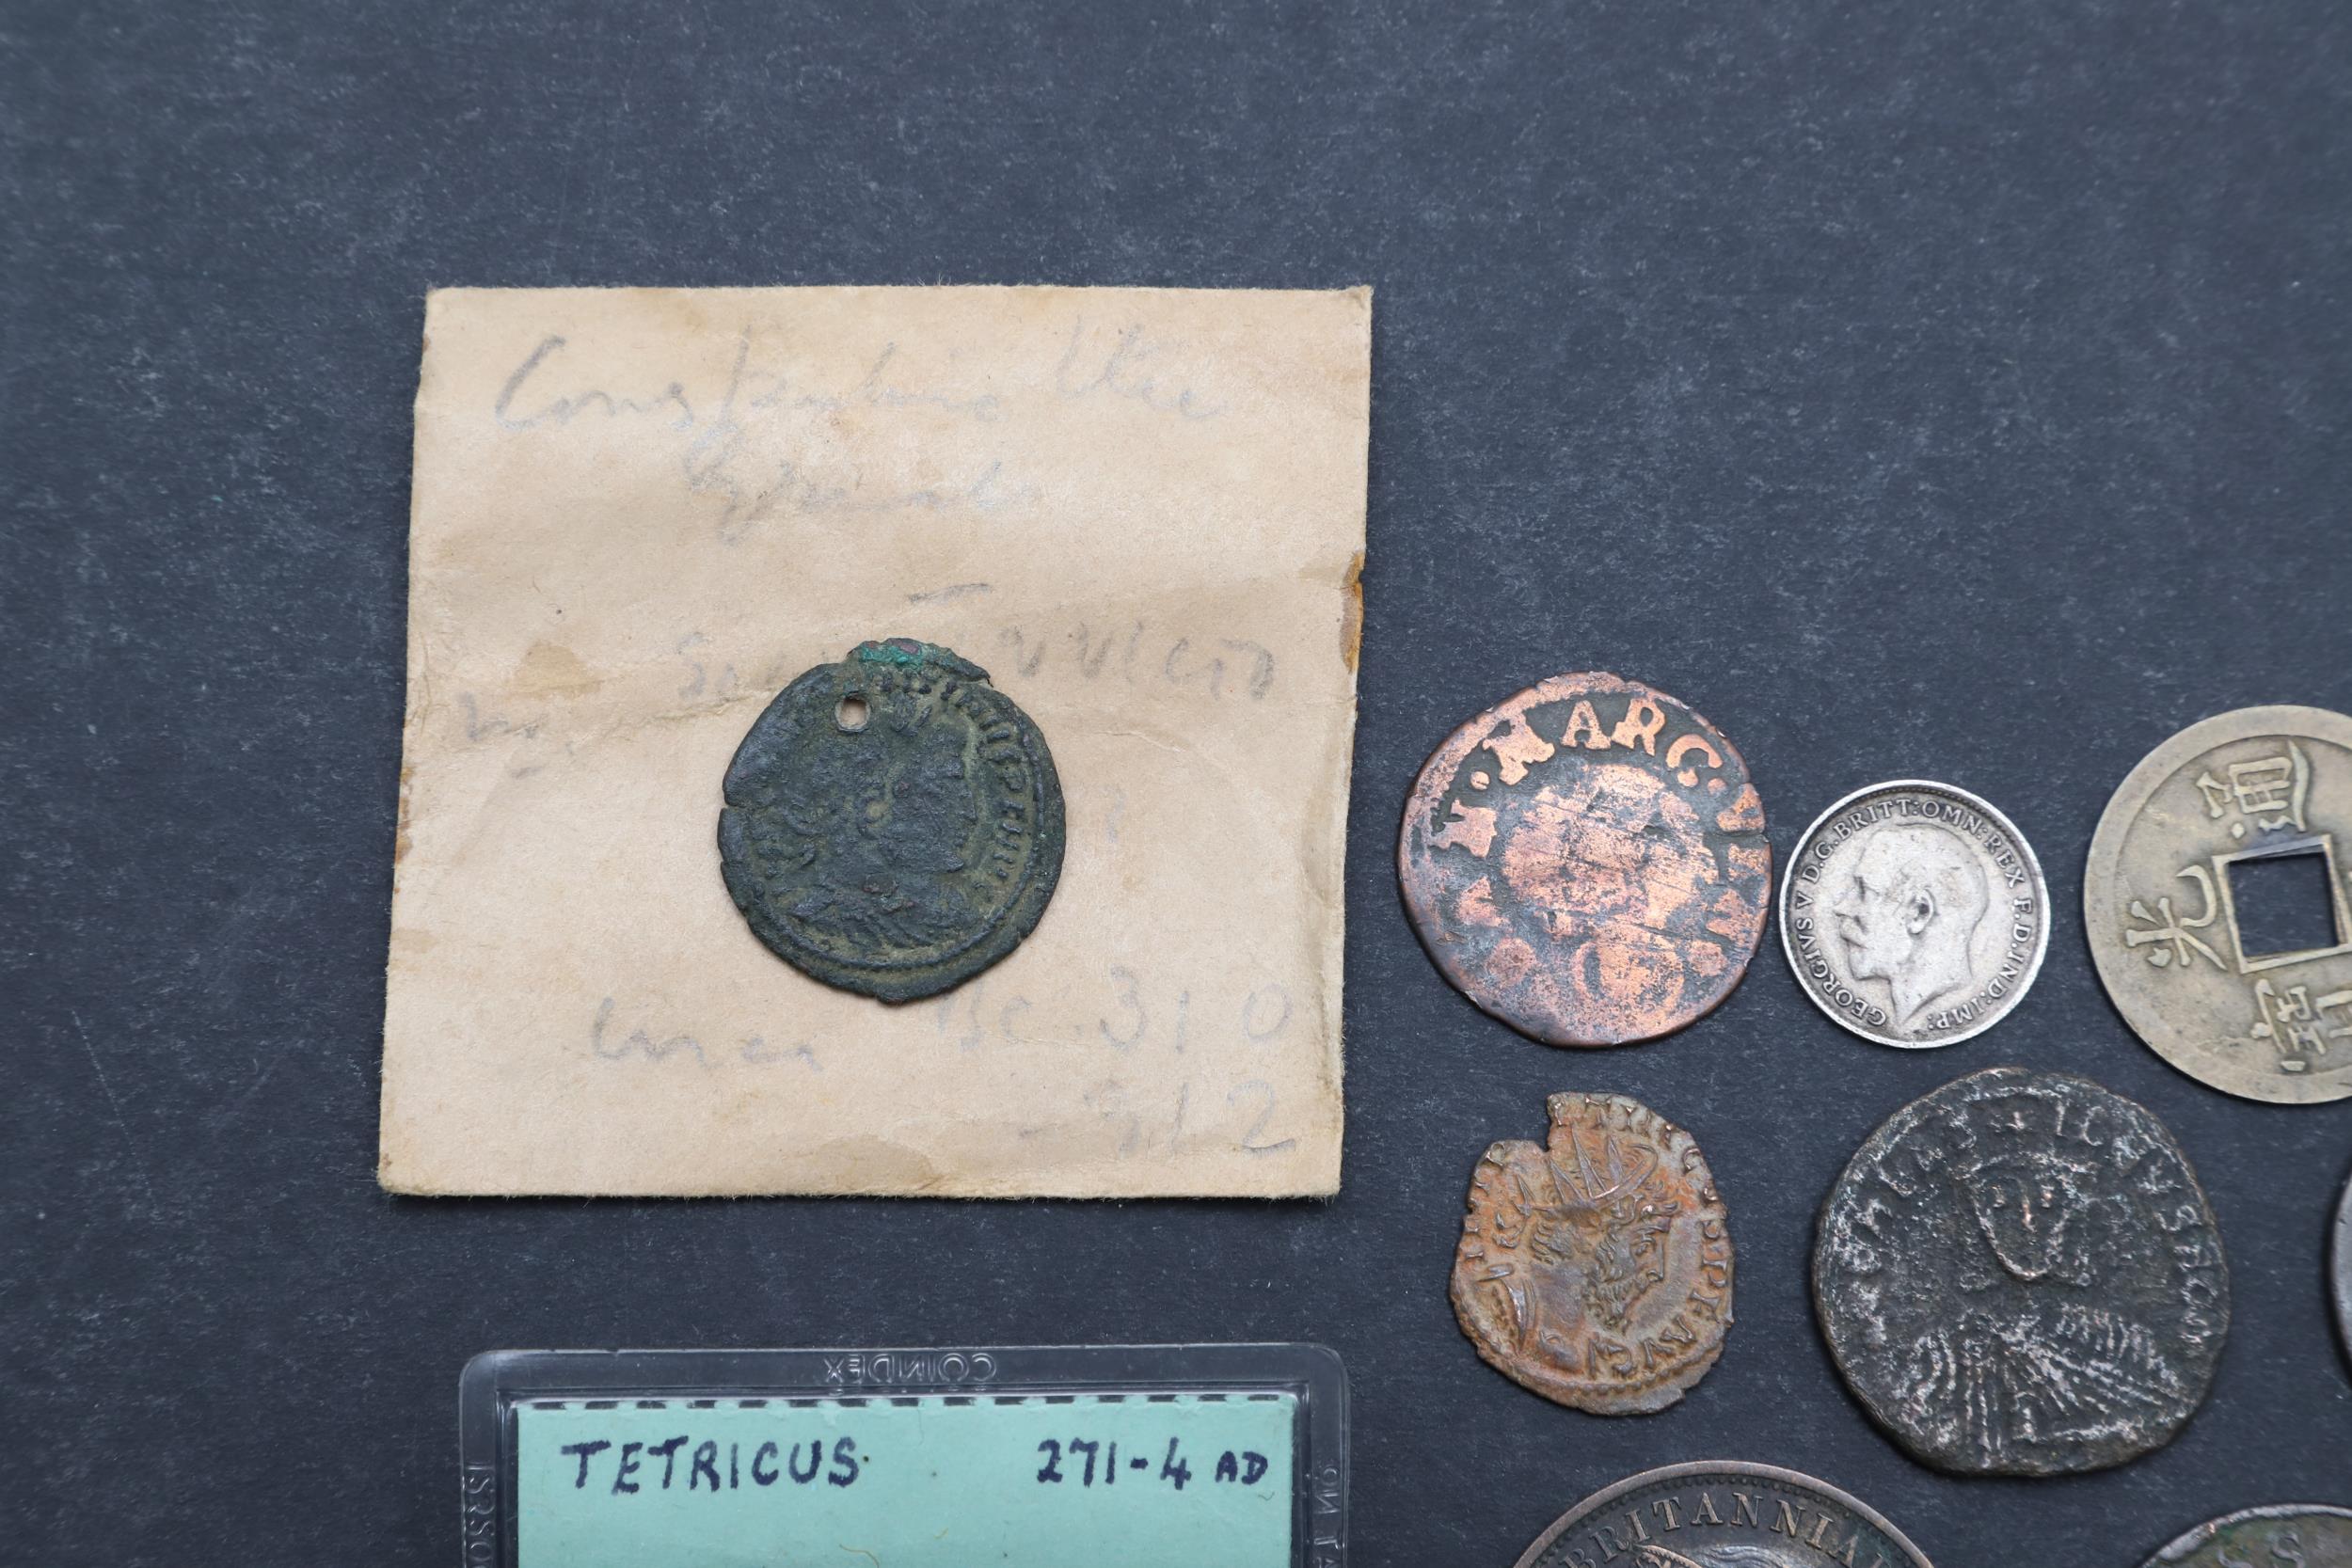 A SMALL COLLECTION OF COINS INCLUDING ROMAN, JETONS AND OTHERS. - Image 2 of 6